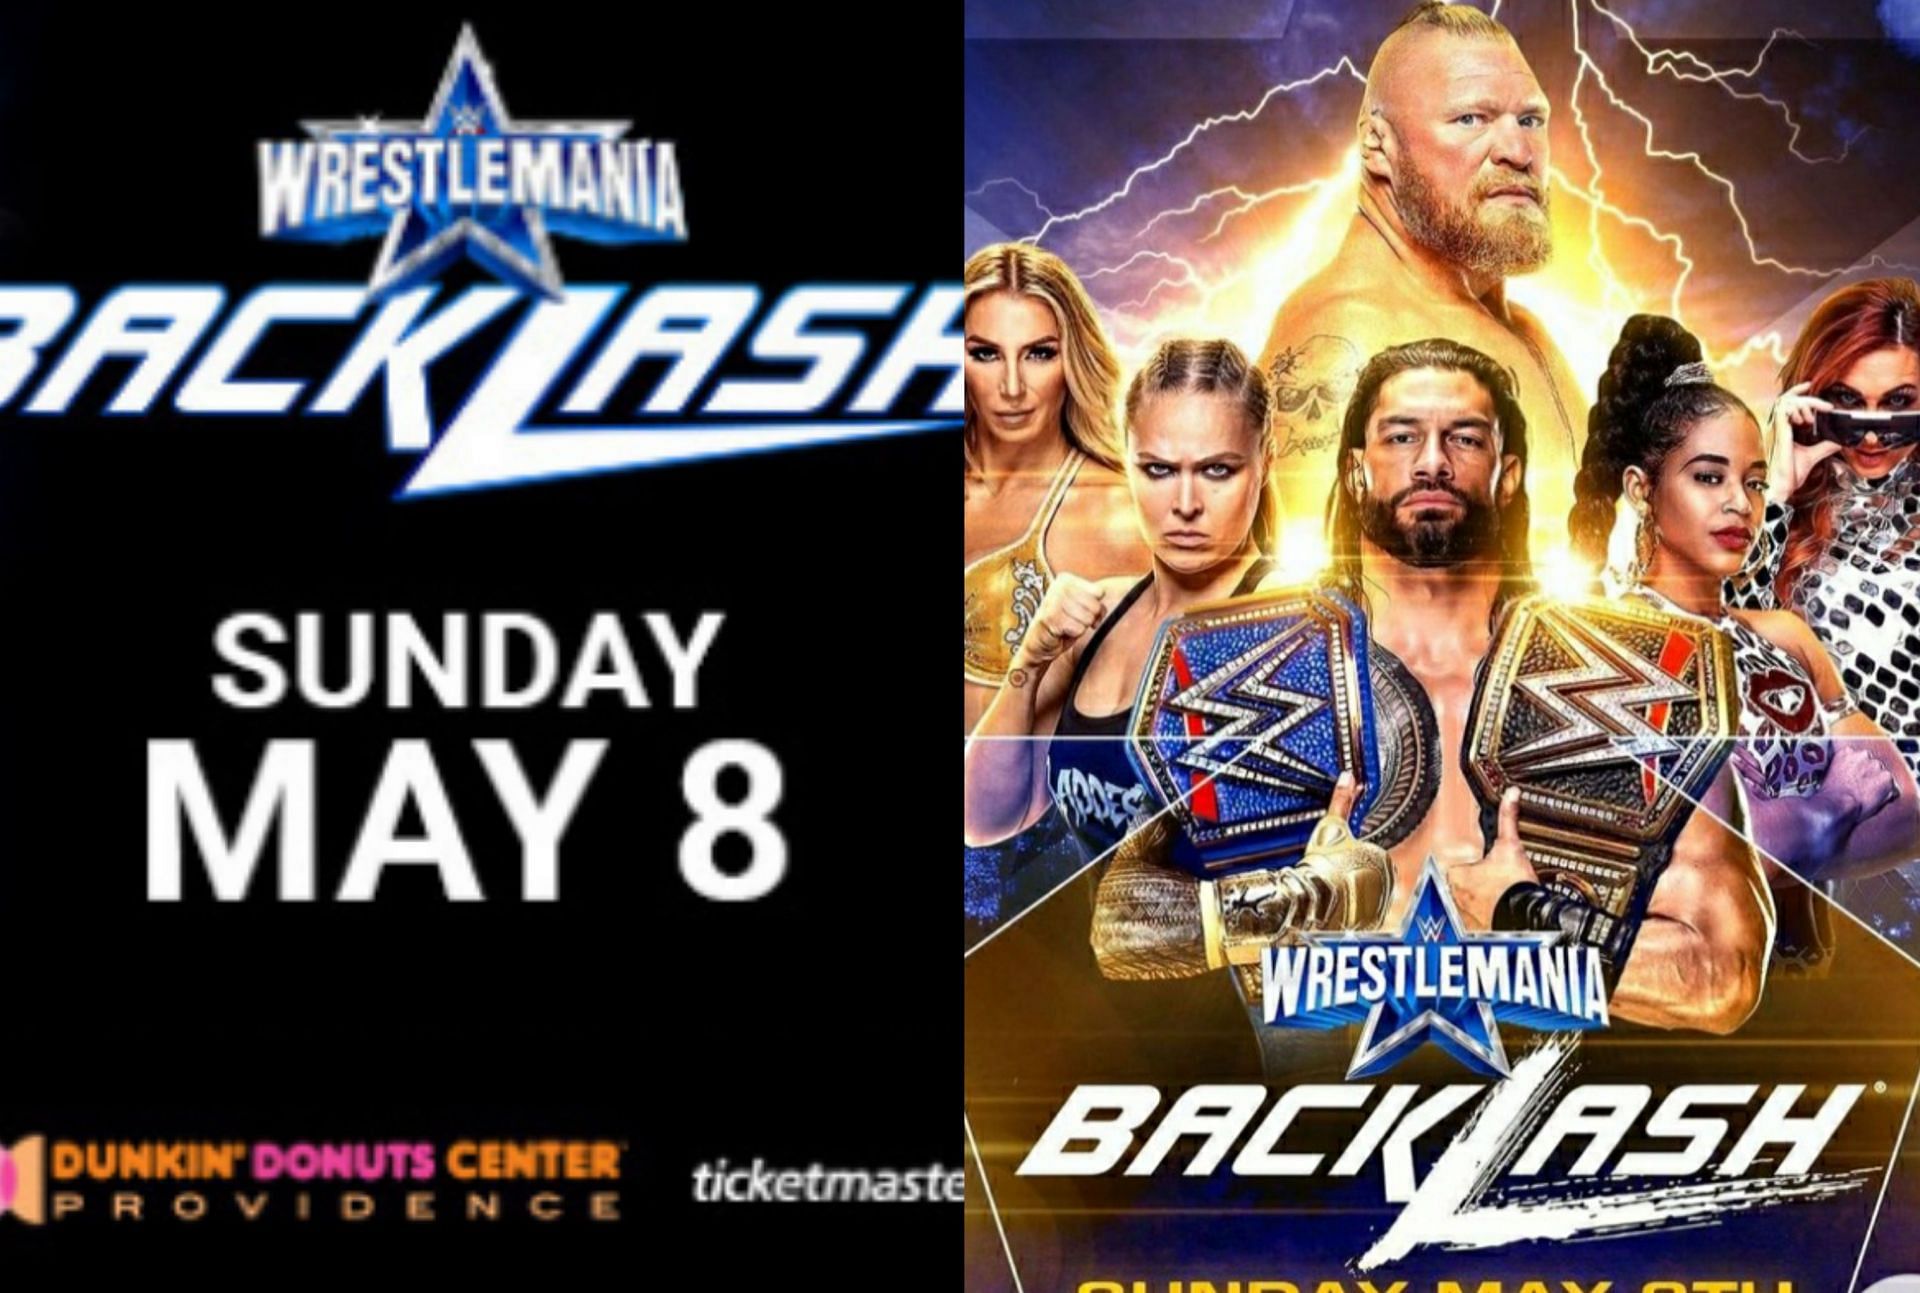 A few high-profile matches could be in store for WrestleMania Backlash